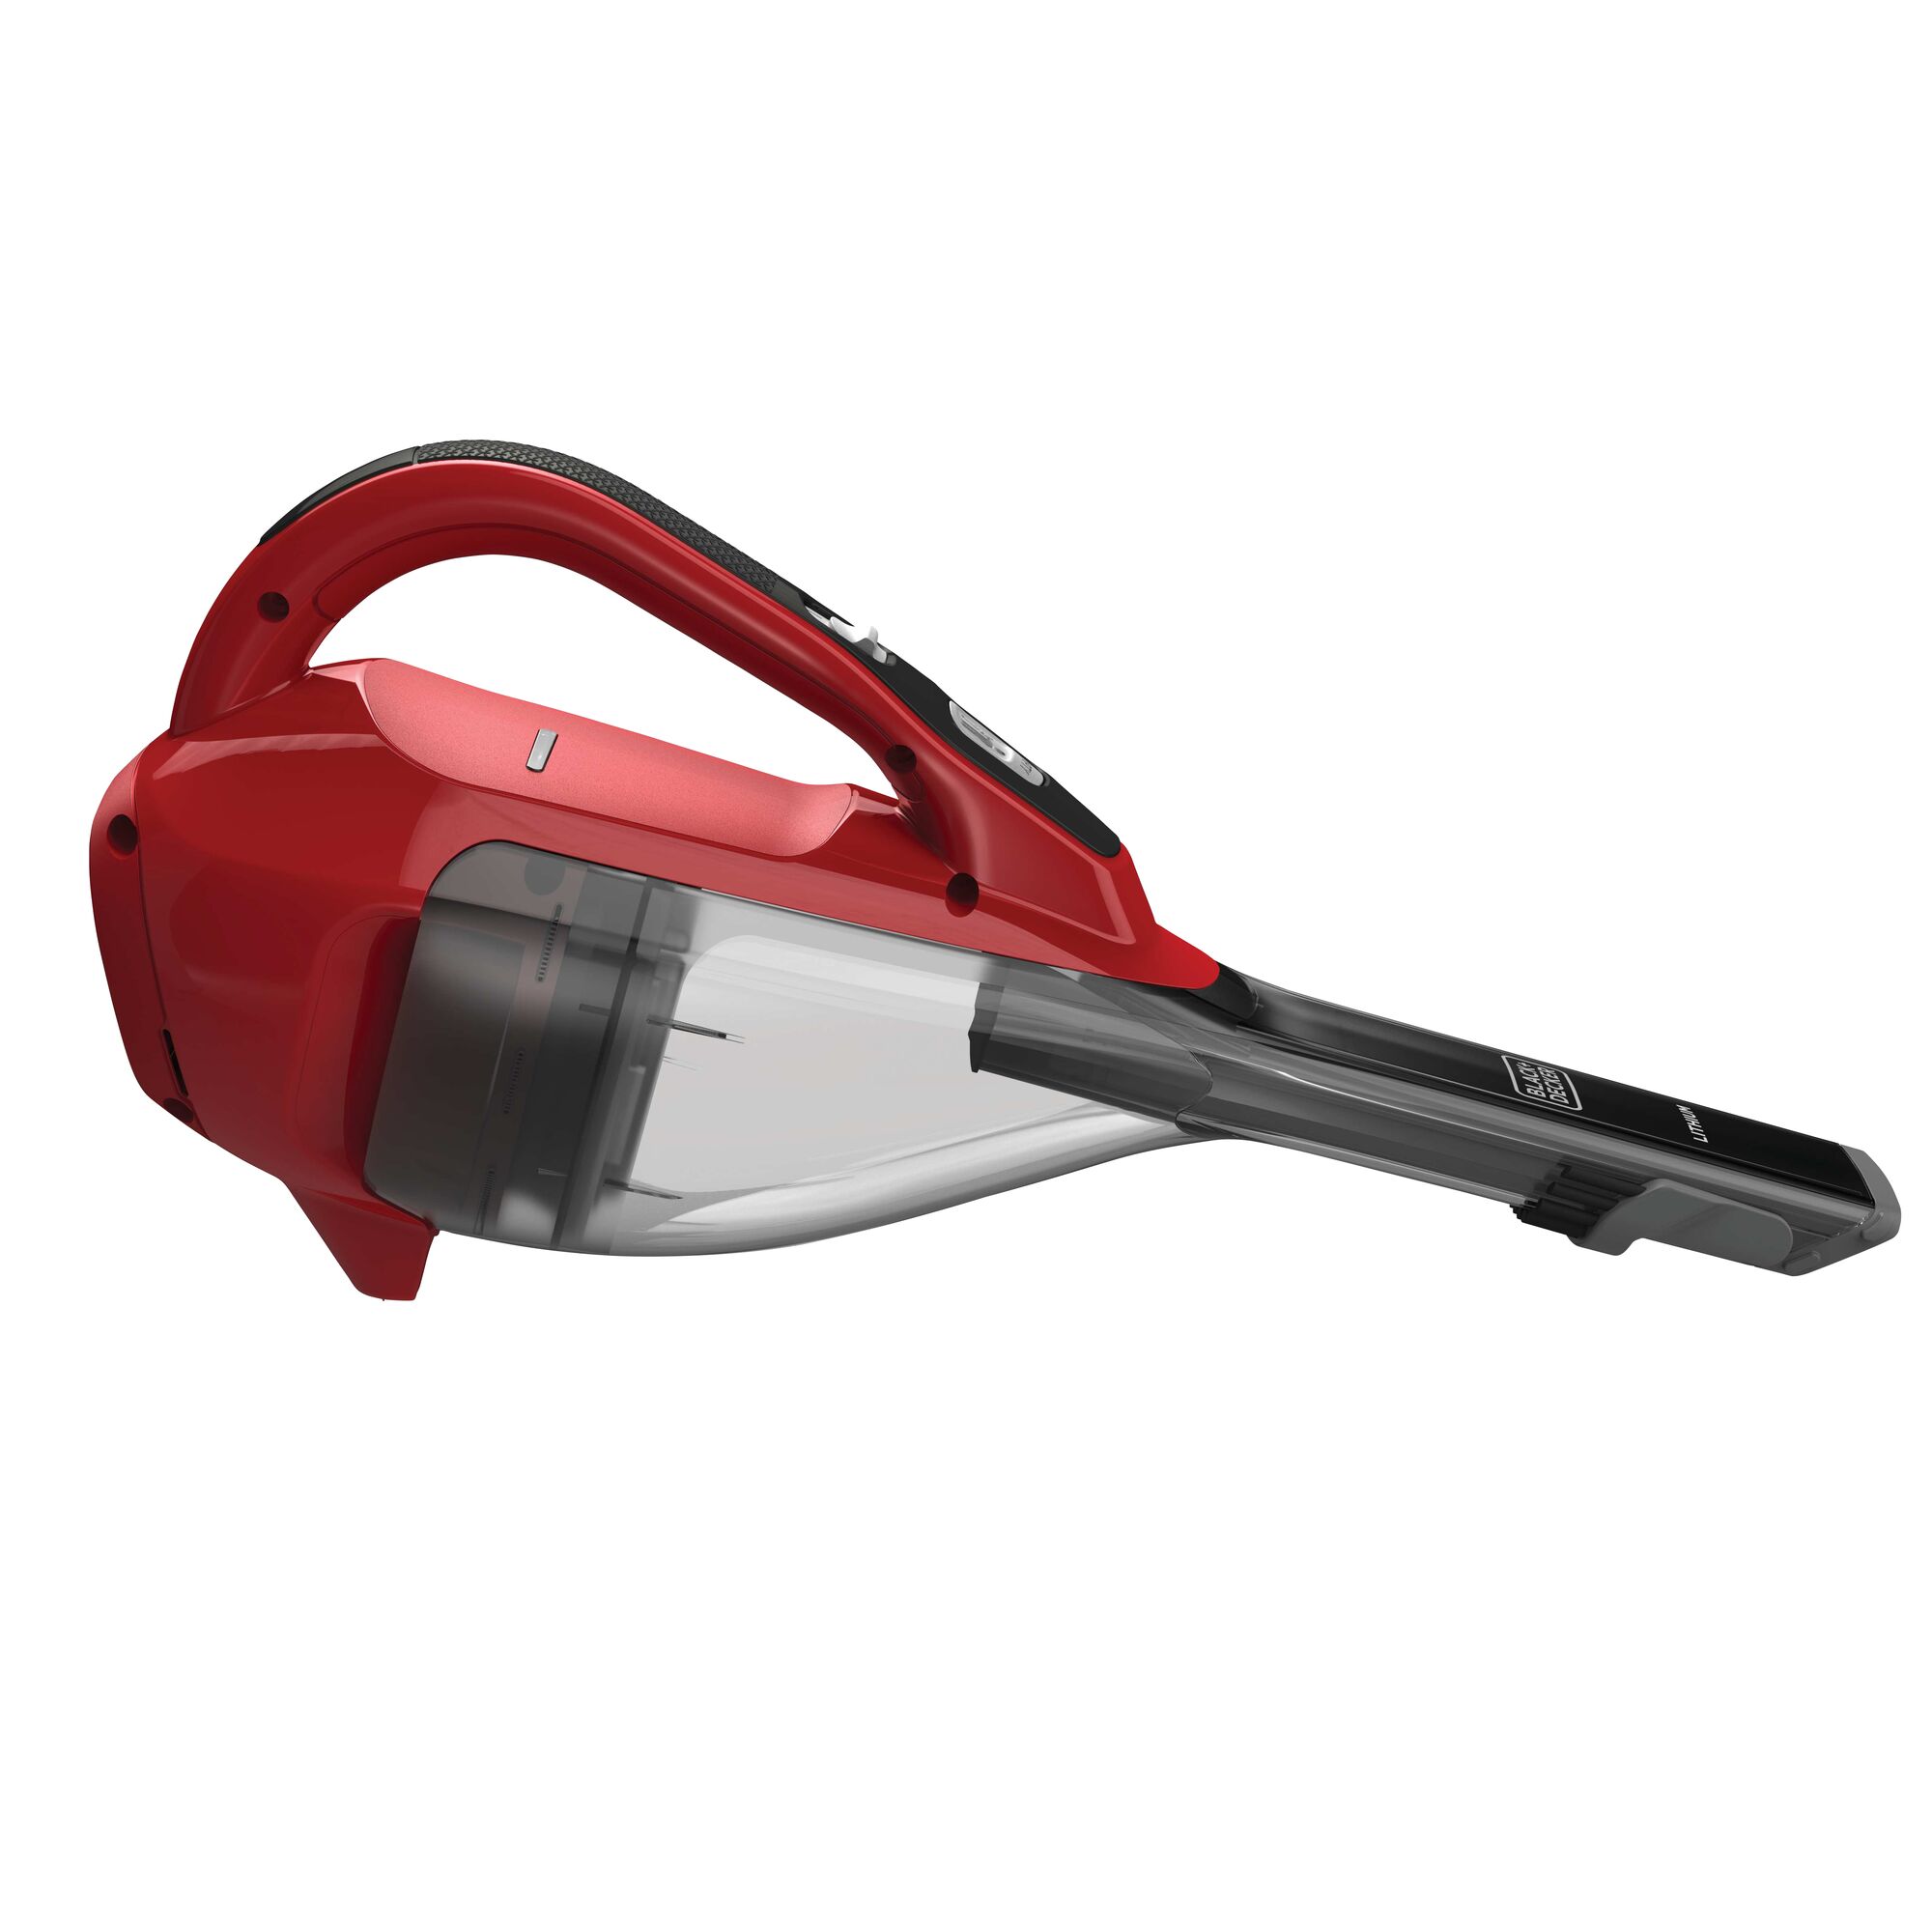 Side profile of dustbuster Advanced Clean cordless hand vacuum.